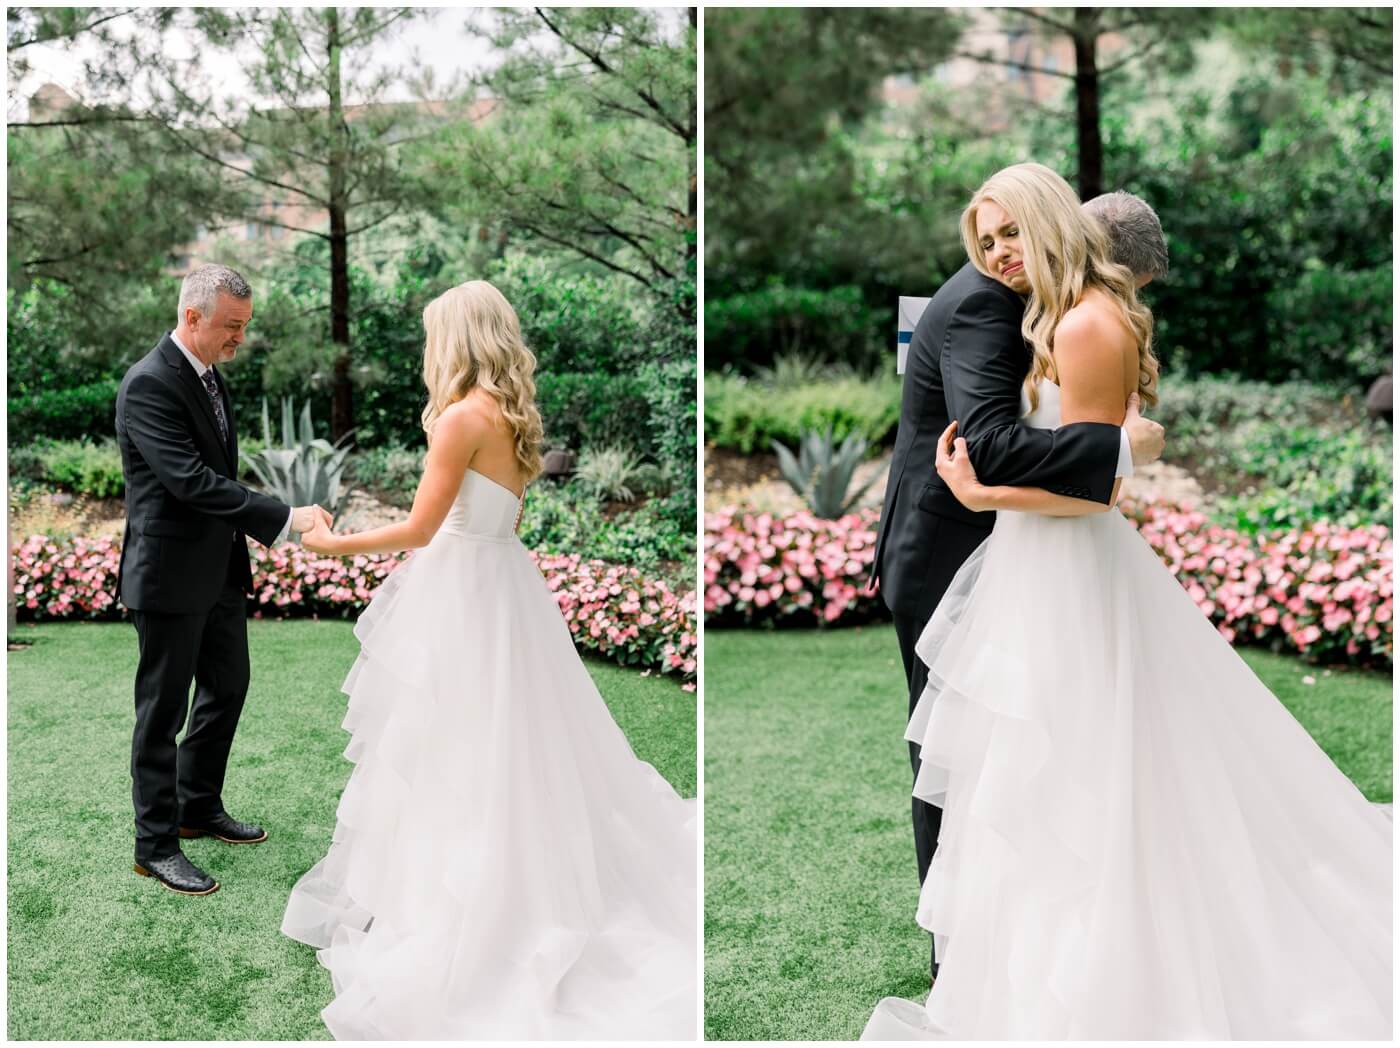 Dad cries as he sees his daughter on her wedding day